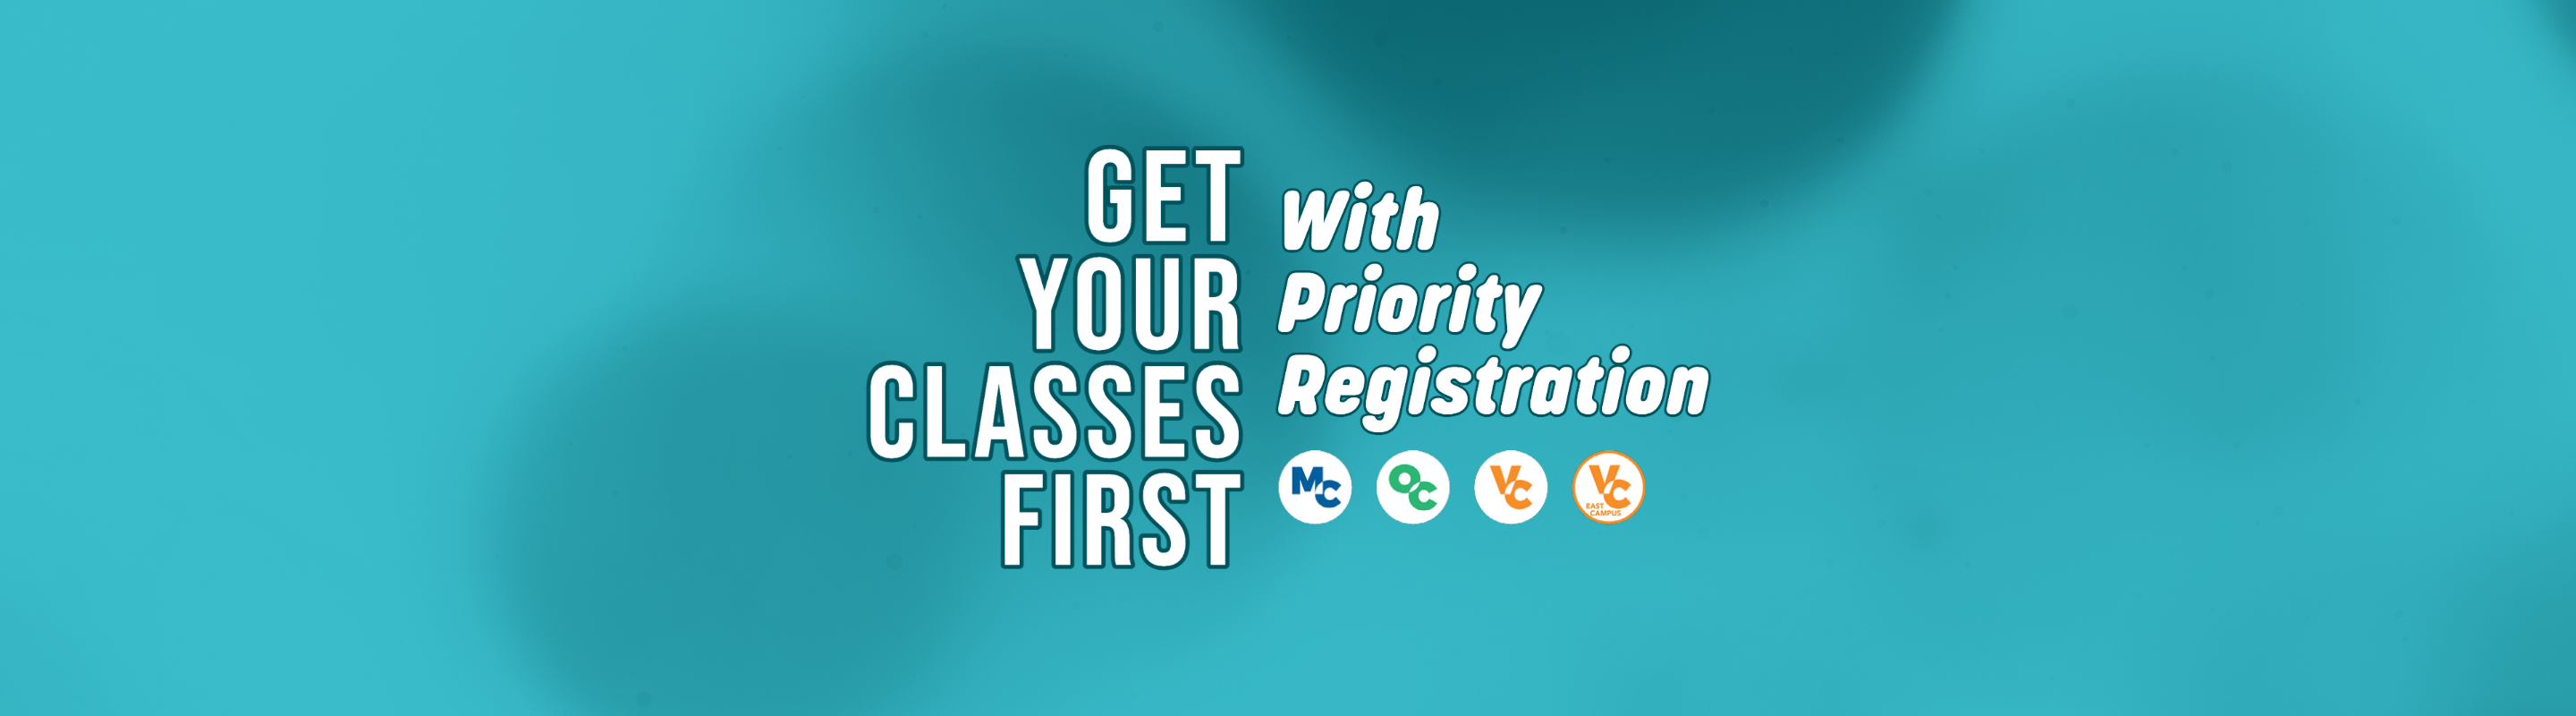 Get Your Classes First with Priority Registration